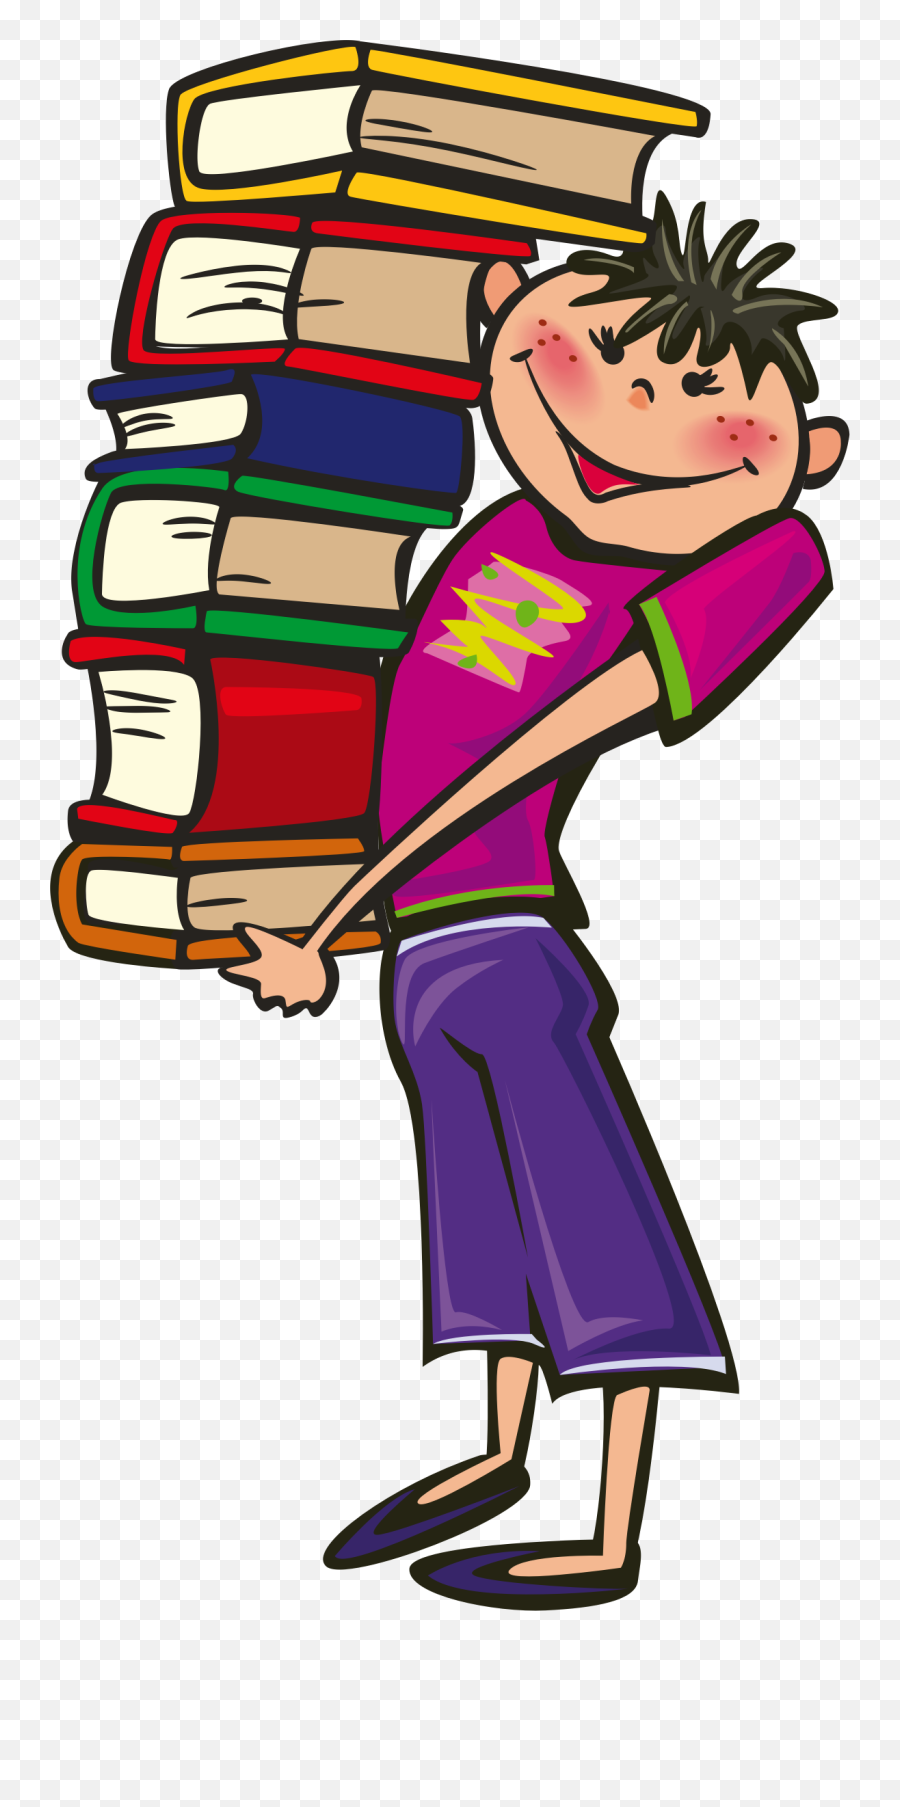 Stack Of Books Image Of Stack Books Clipart School Book Clip - Student Carrying Books Clipart Emoji,Boy And Book Emoji